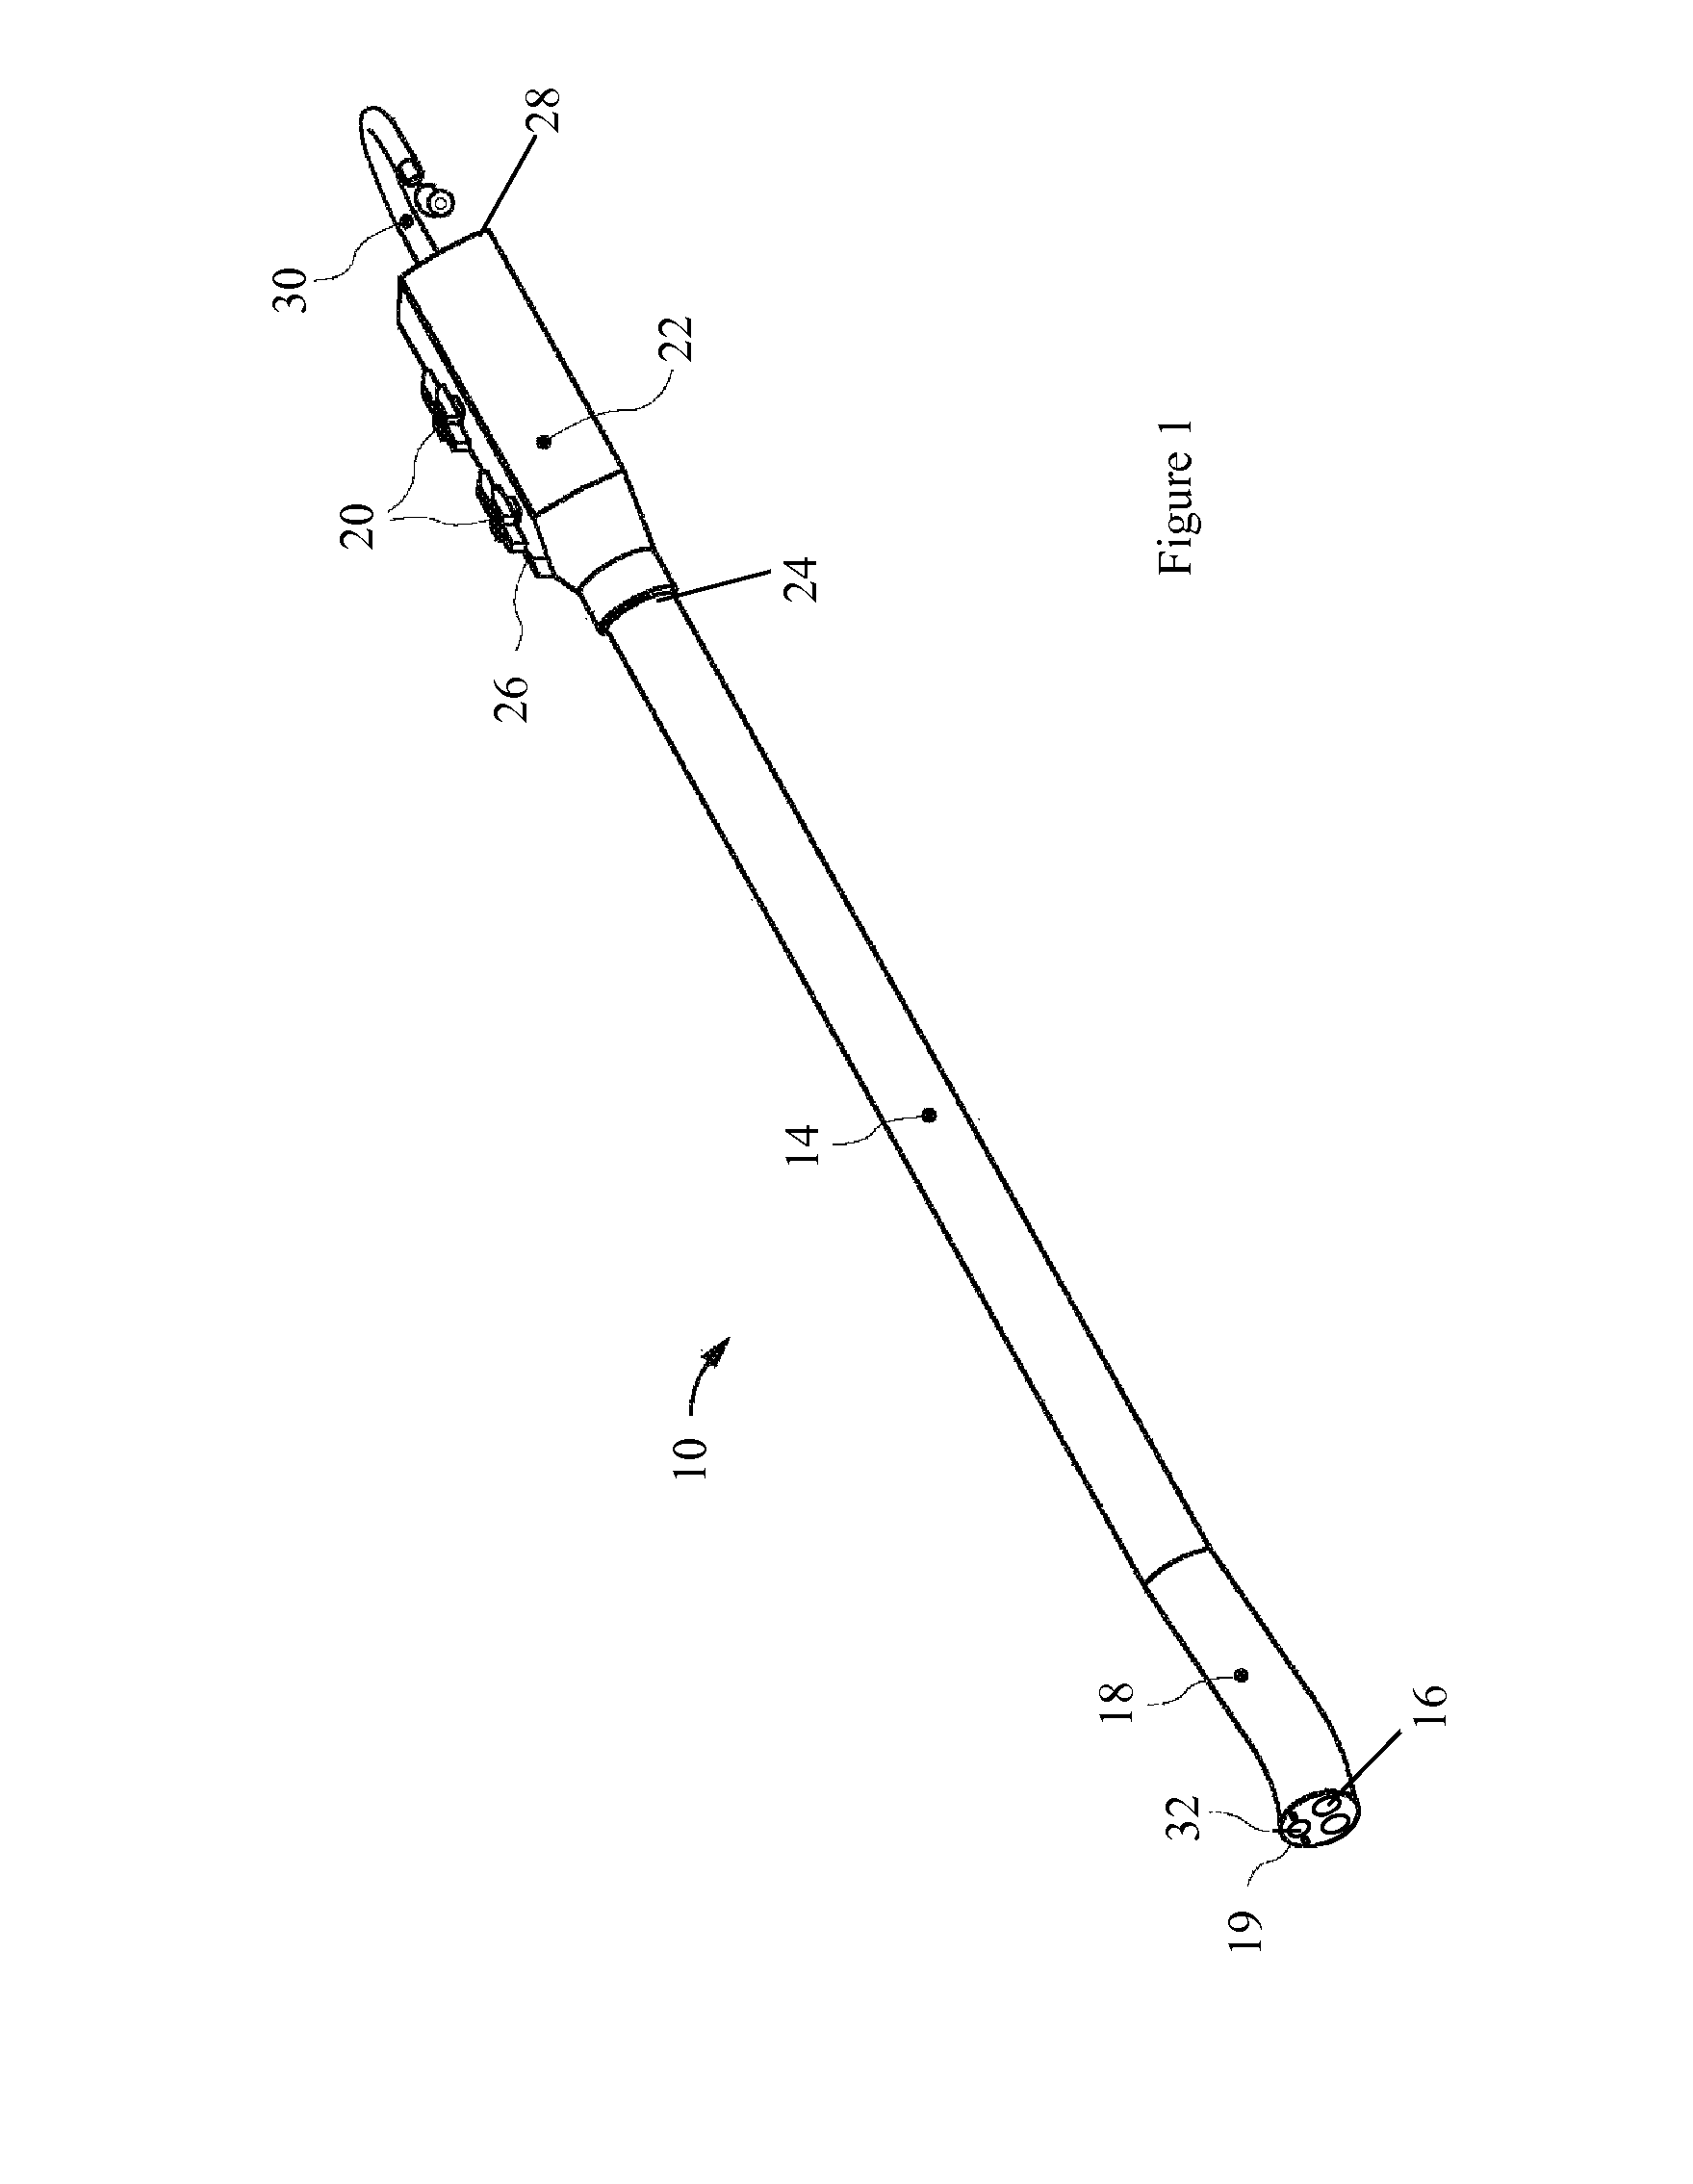 Vibratory device, endoscope having such a device, method for configuring an endoscope, and method of reducing looping of an endoscope